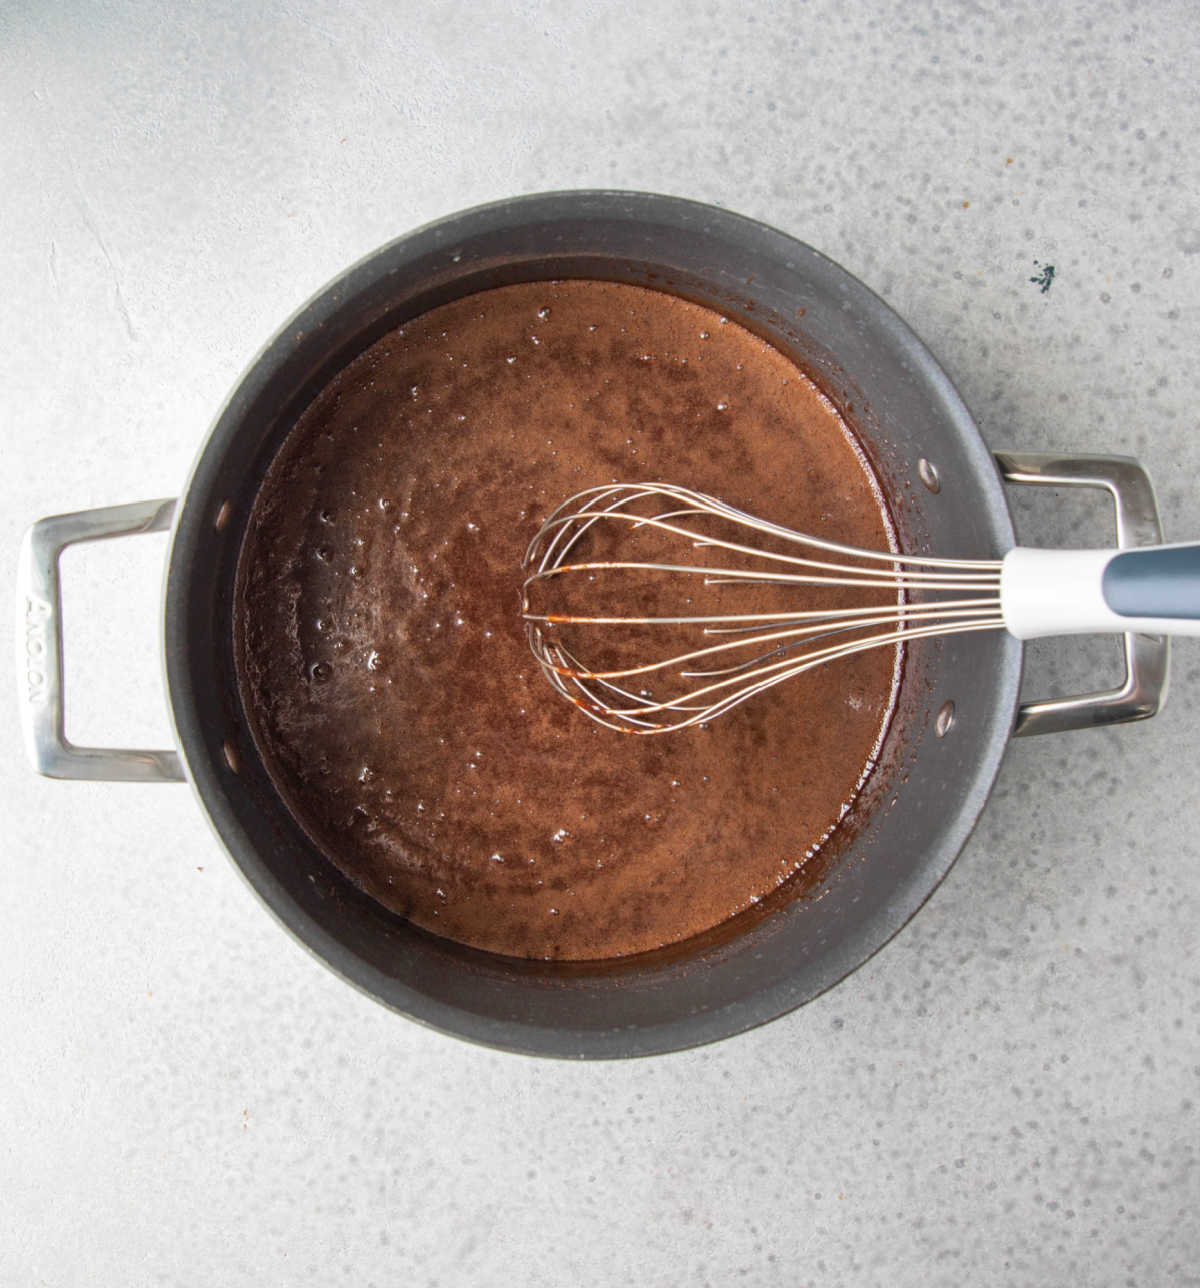 Boiled milk and cocoa powder mixture in a saucepan. 